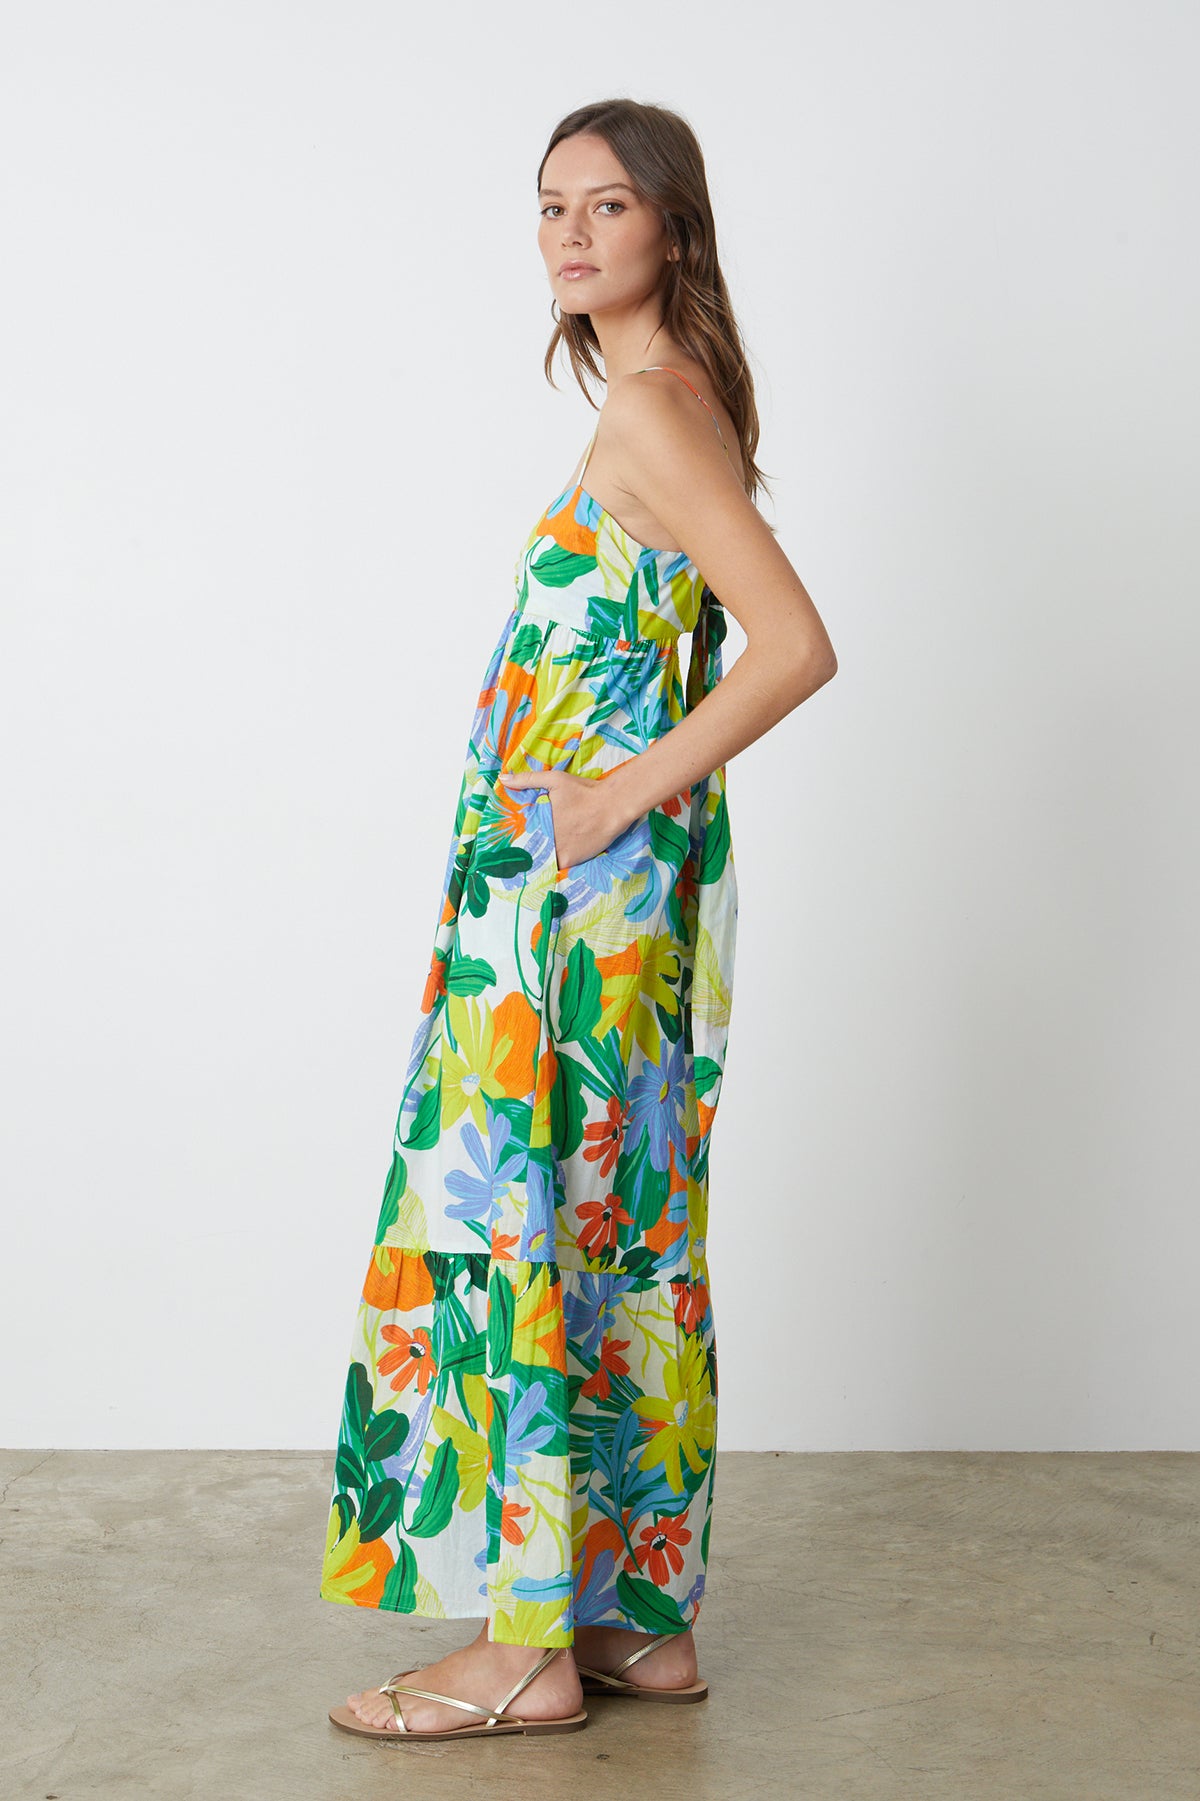 A woman wearing the Velvet by Graham & Spencer KAYLA PRINTED MAXI DRESS.-26342715556033